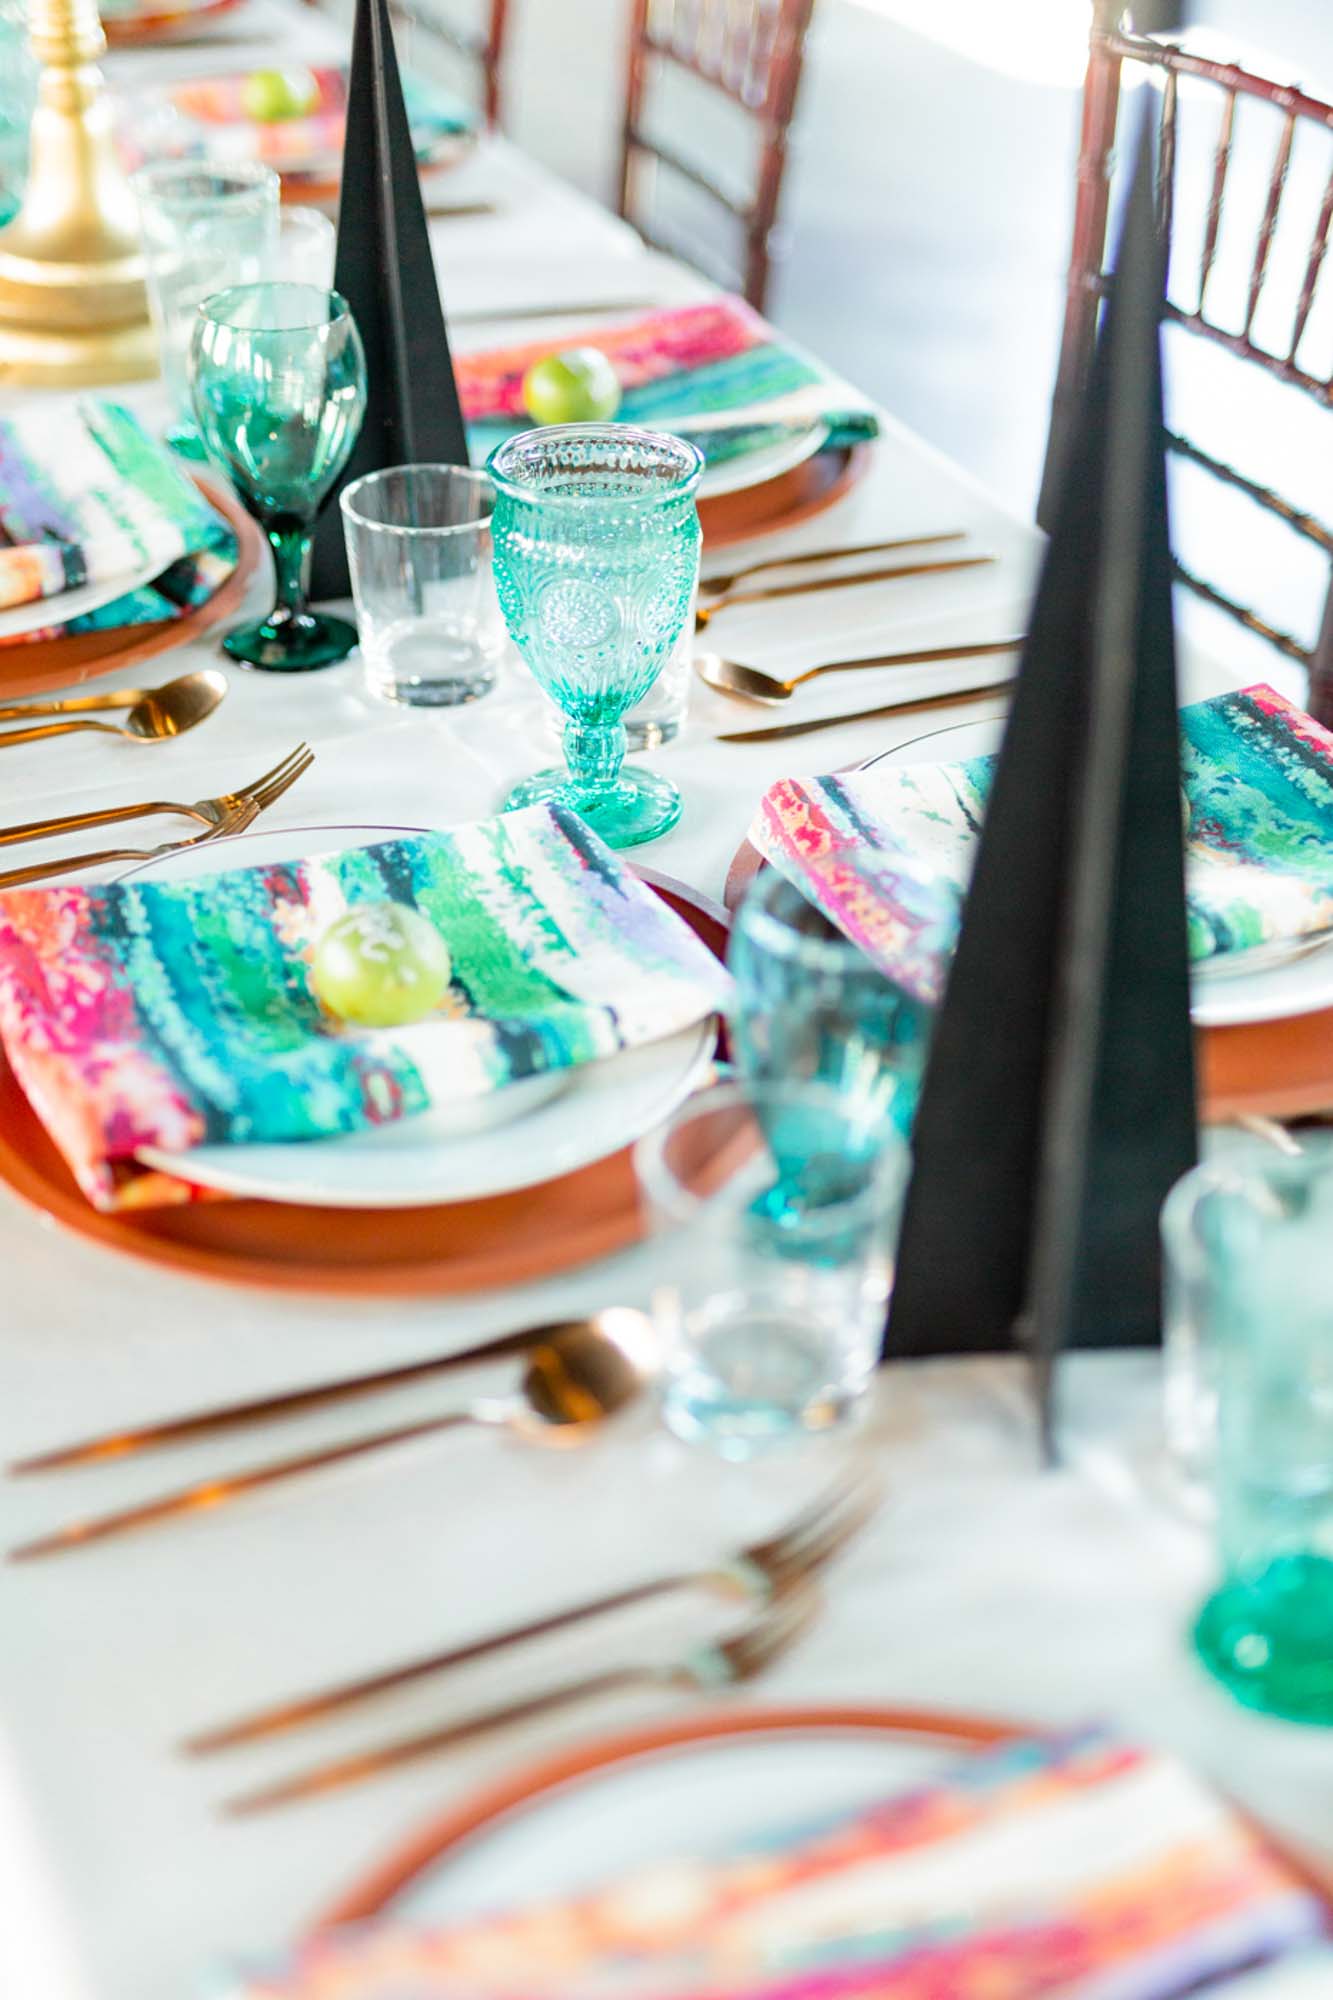 This wedding celebration brought a tropical paradise to Kansas City | Ashley Ice Photography | Featured on Equally Wed, the leading LGBTQ+ wedding magazine